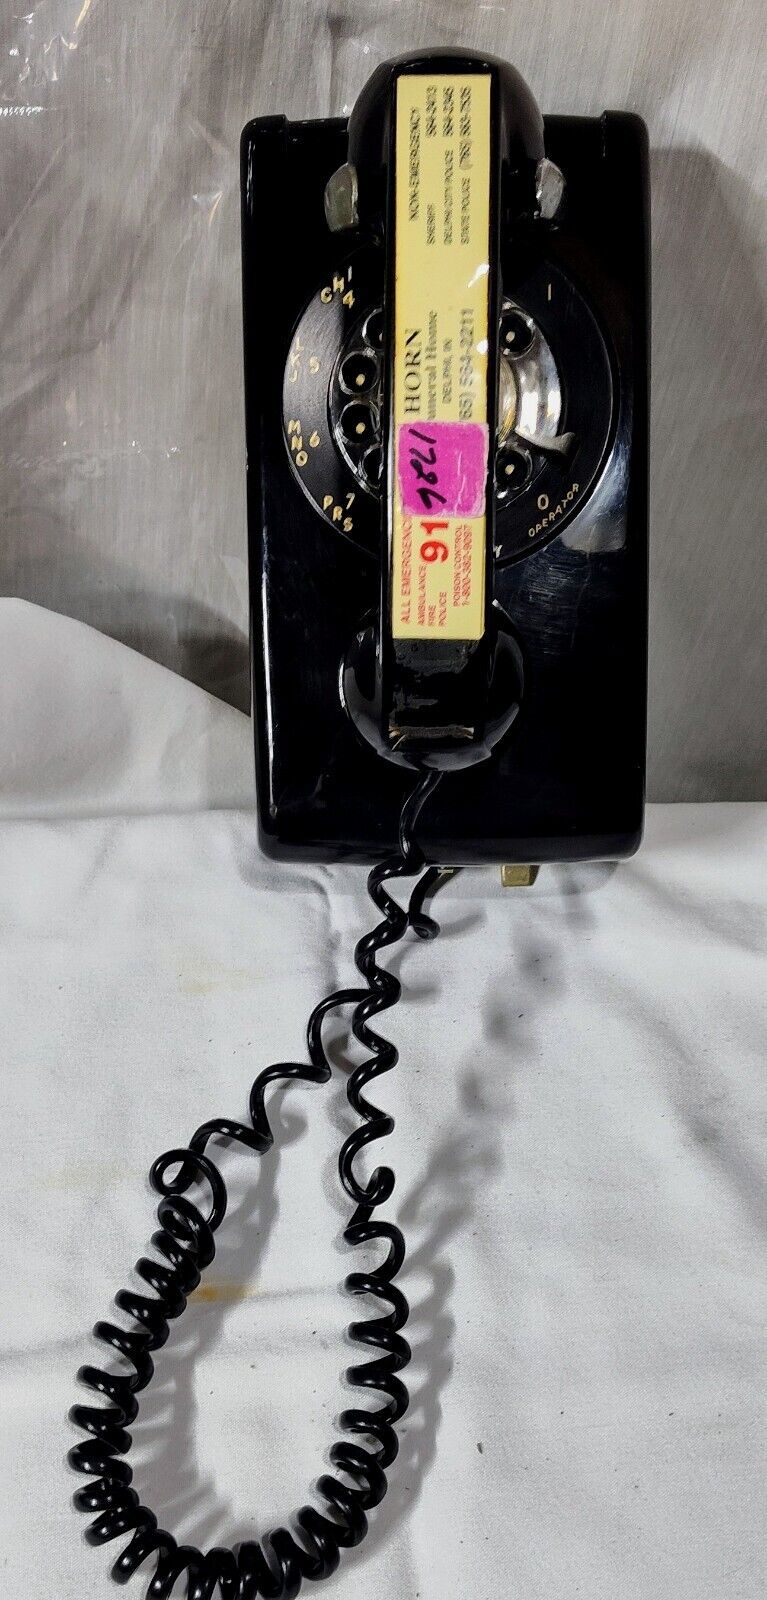 Vintage 1970s Black Northern Telecom Rotary Wall Phone Super Clean Inside & Out